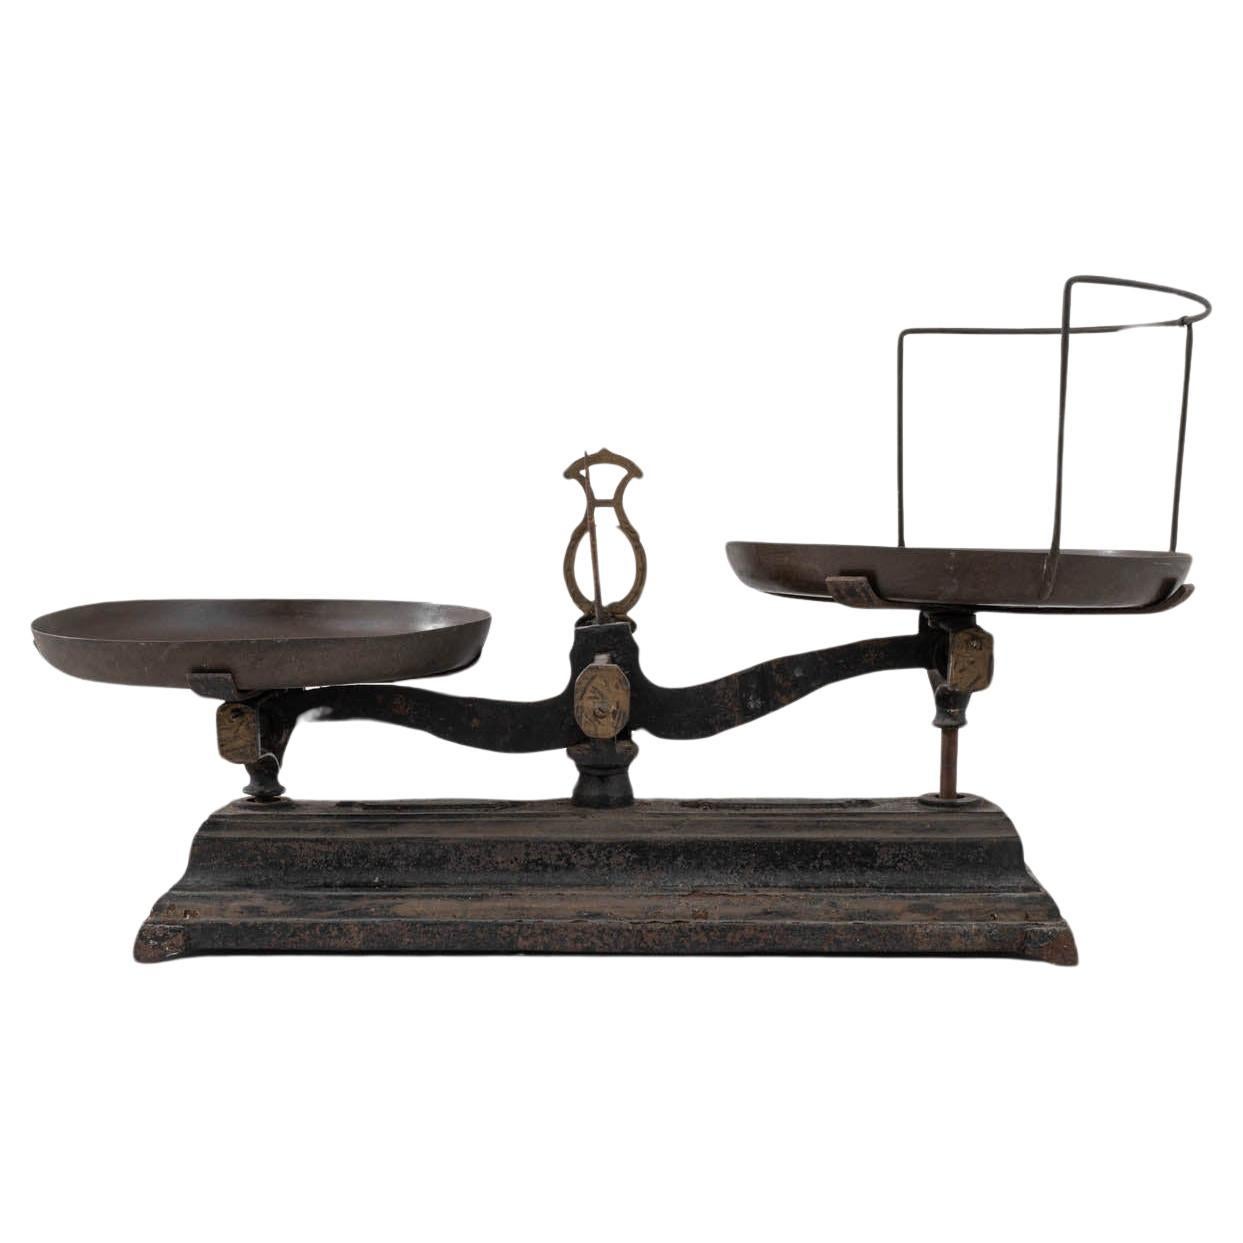 Antique French Cast Iron Scale For Sale